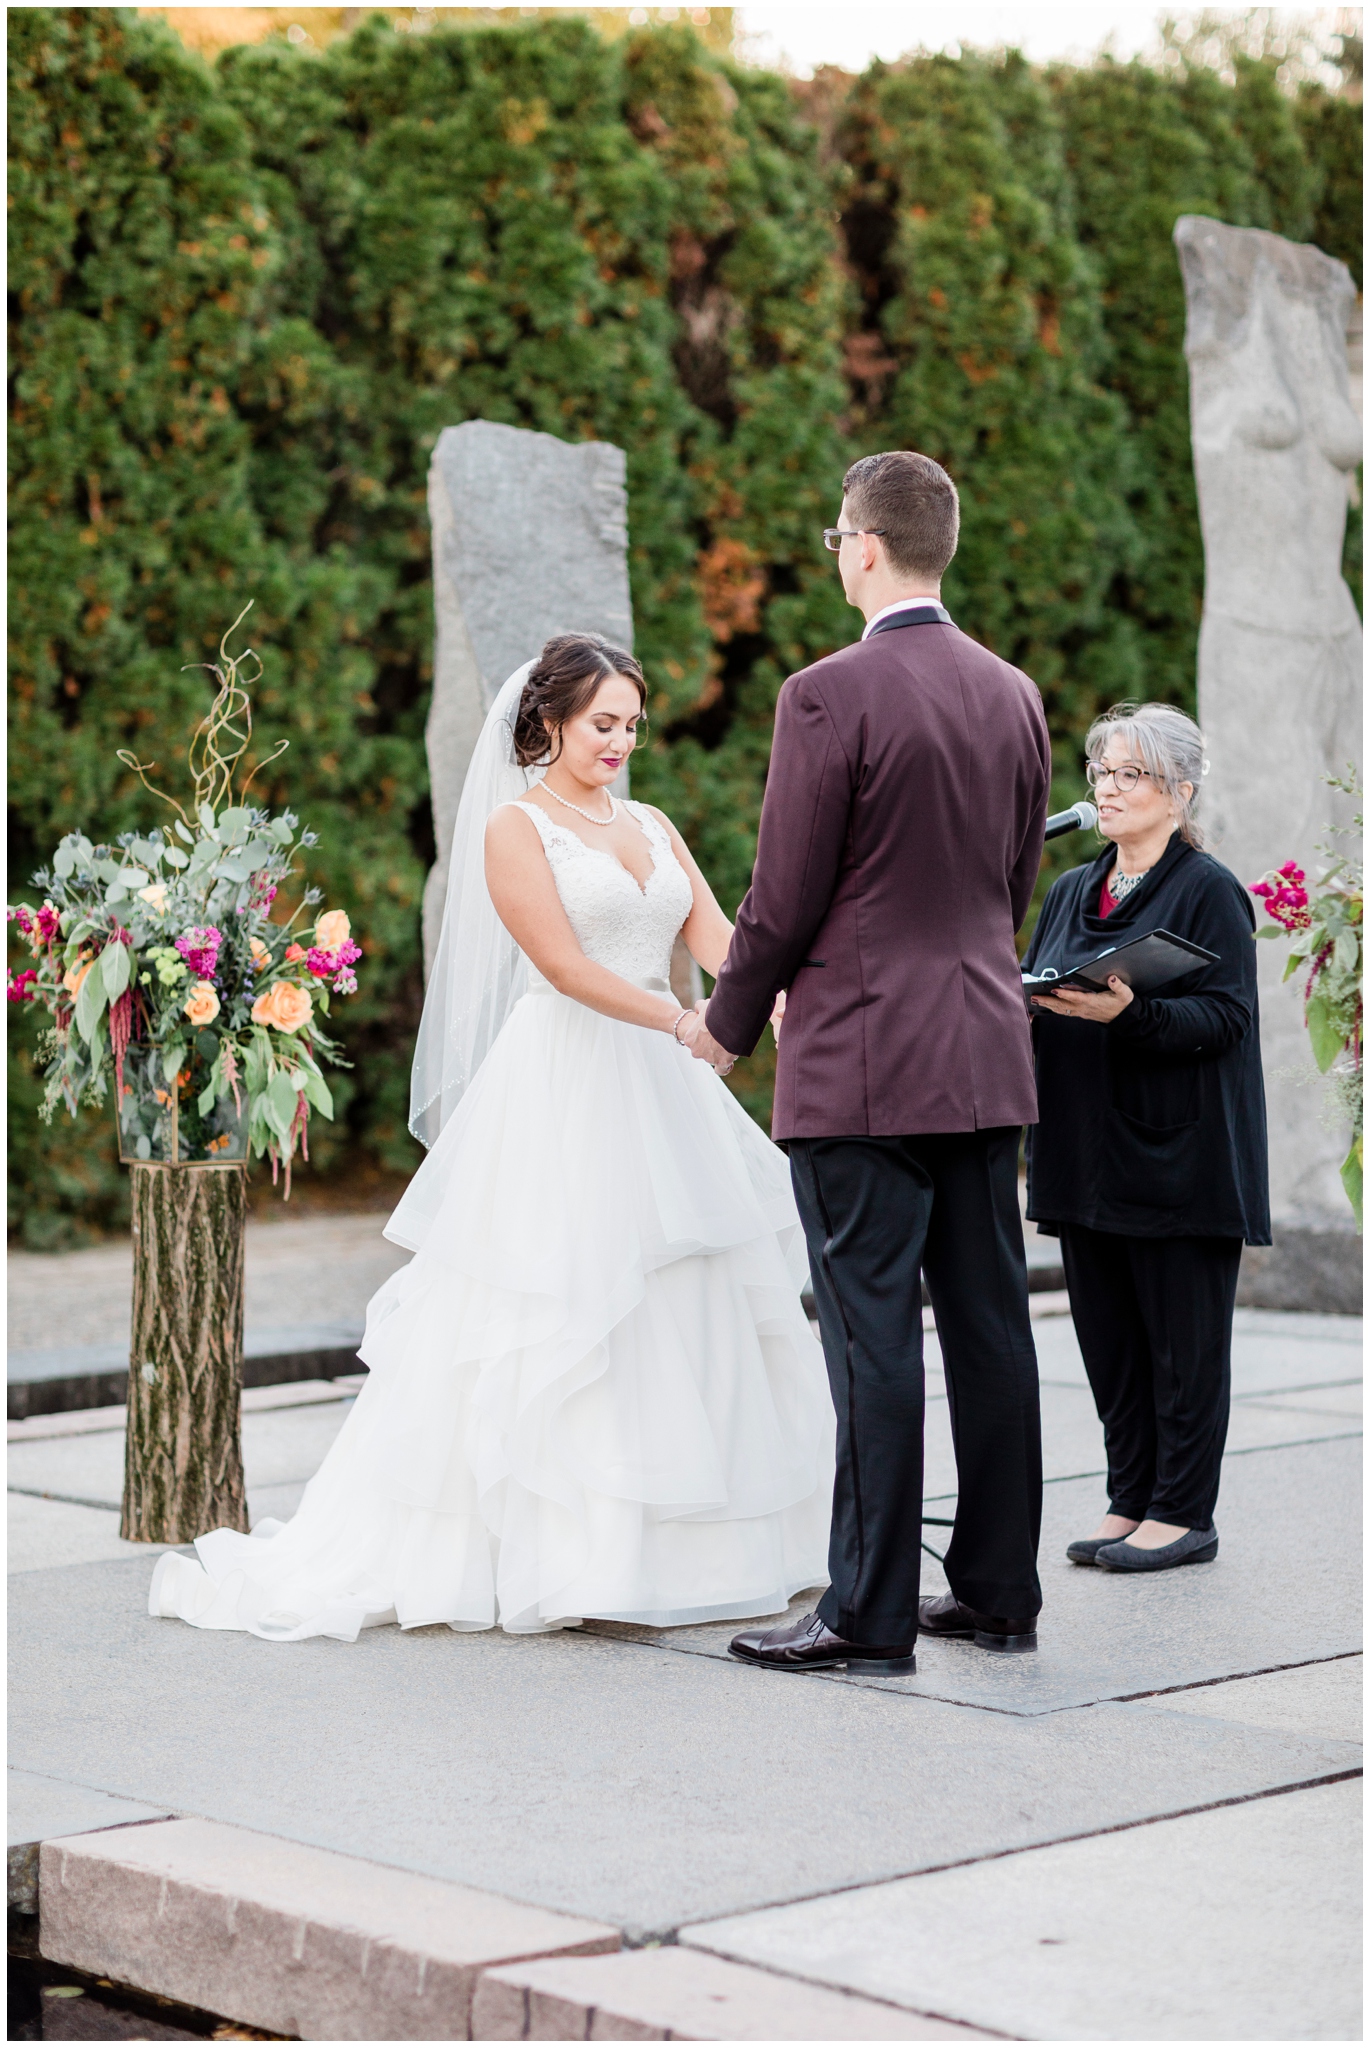 Outdoor Ceremony at Grounds for Sculpture Pics